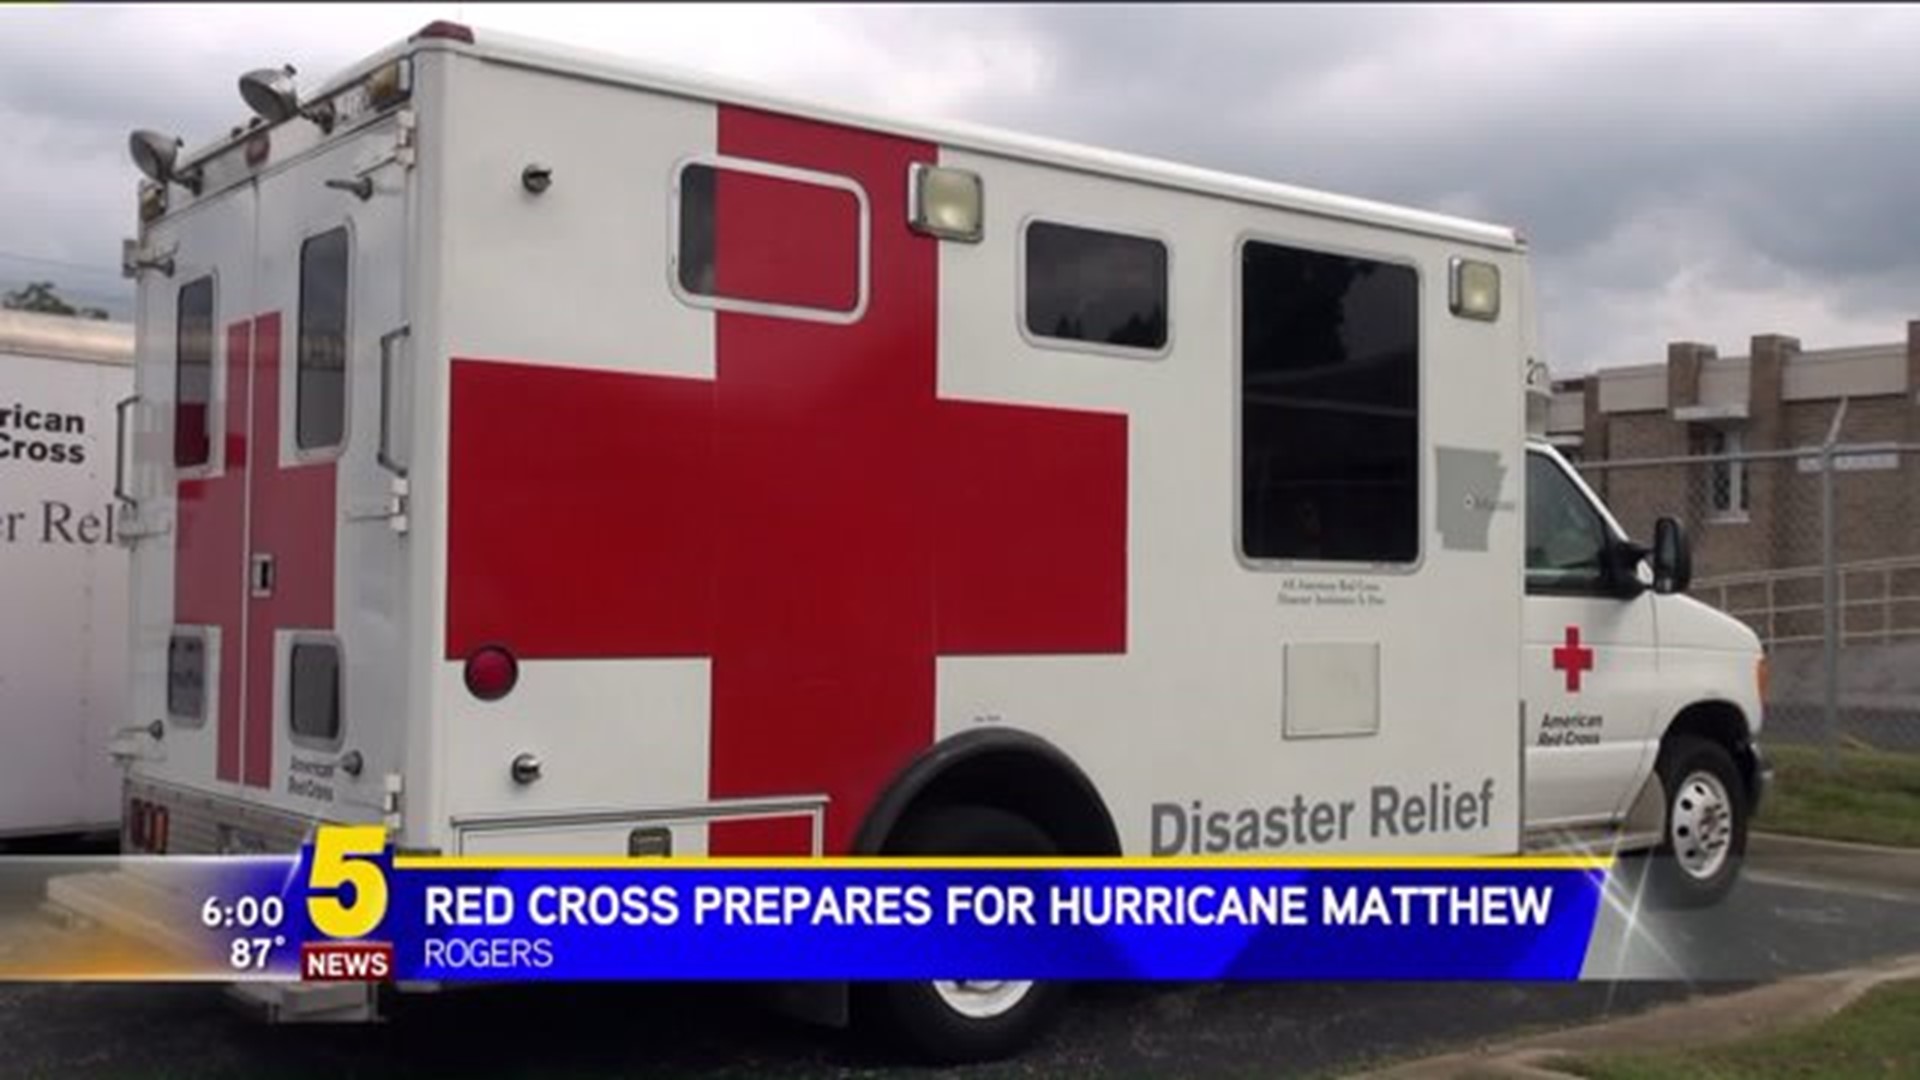 RED CROSS PREPARES TO HELP WITH HURRICANE AFTERMATH